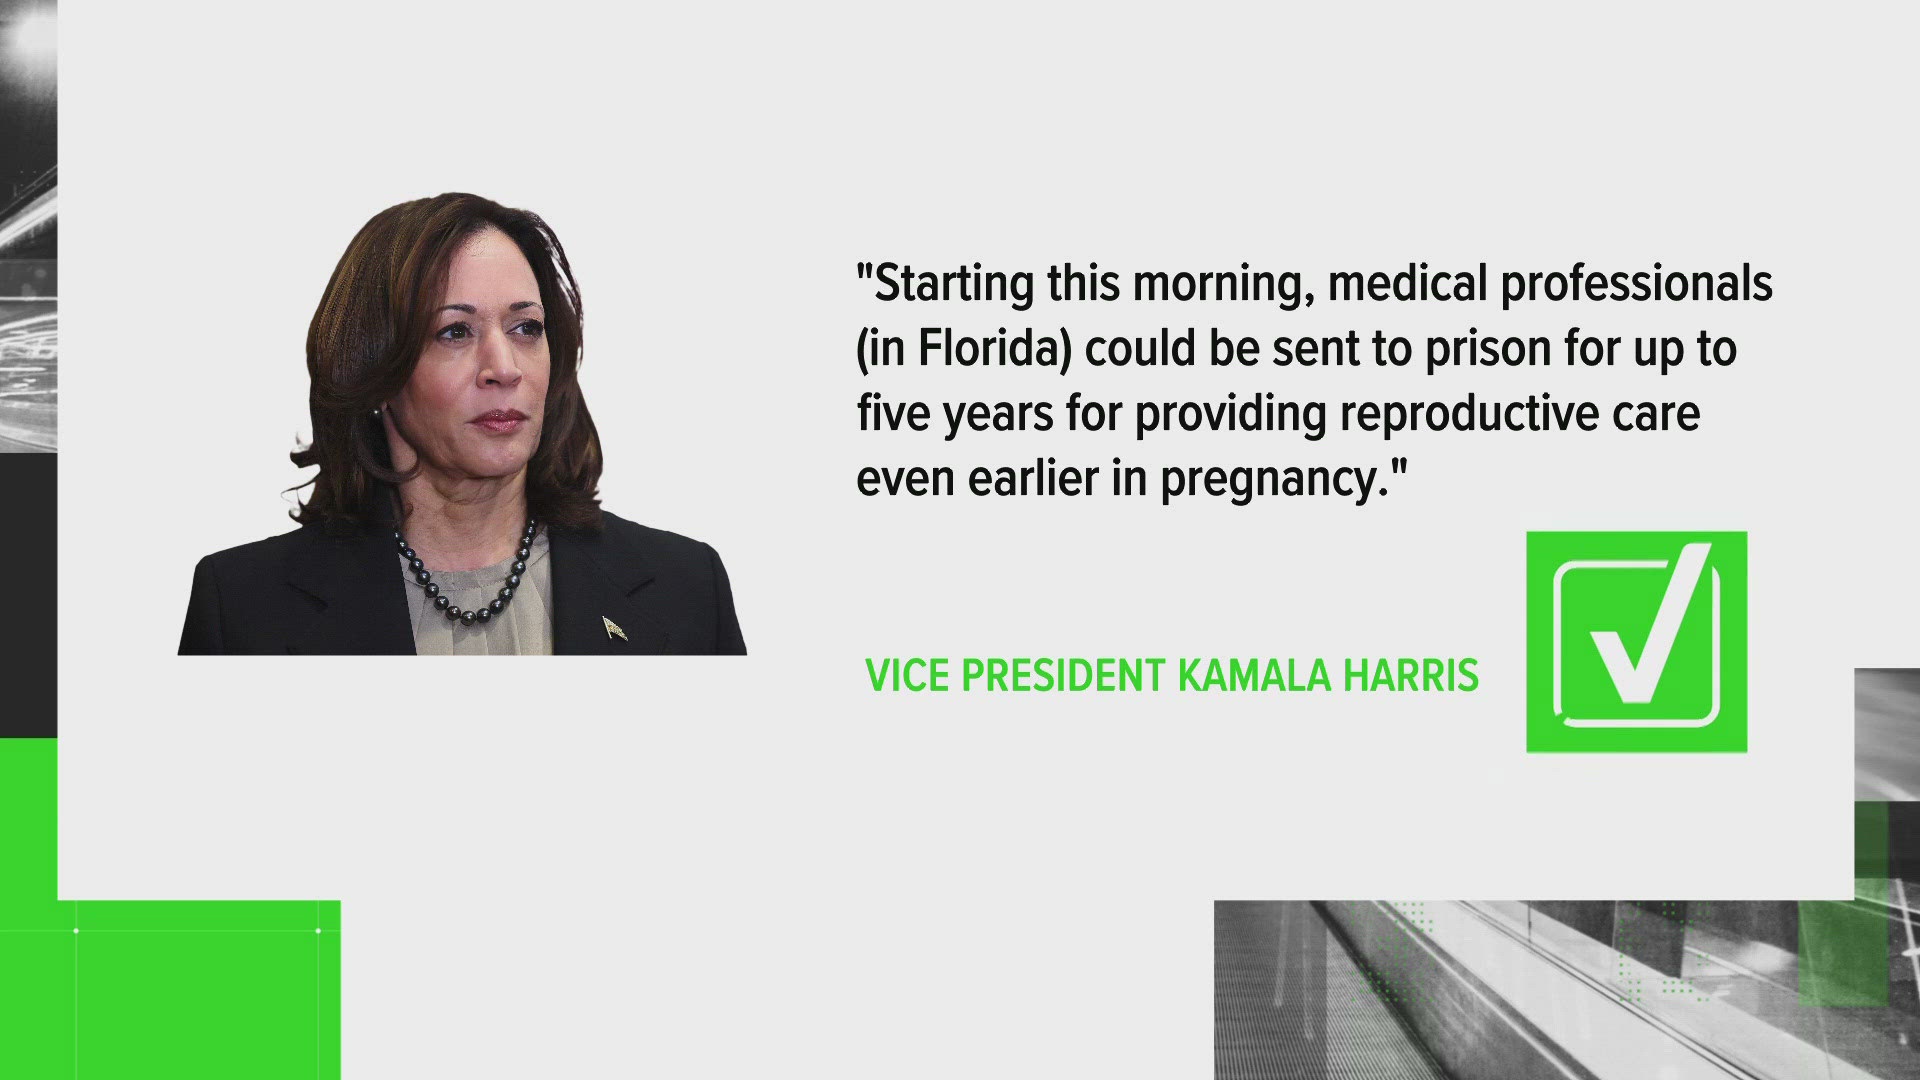 Harris was in Jacksonville speaking in opposition to Florida's 6-week abortion ban that went into effect hours before her arrival.